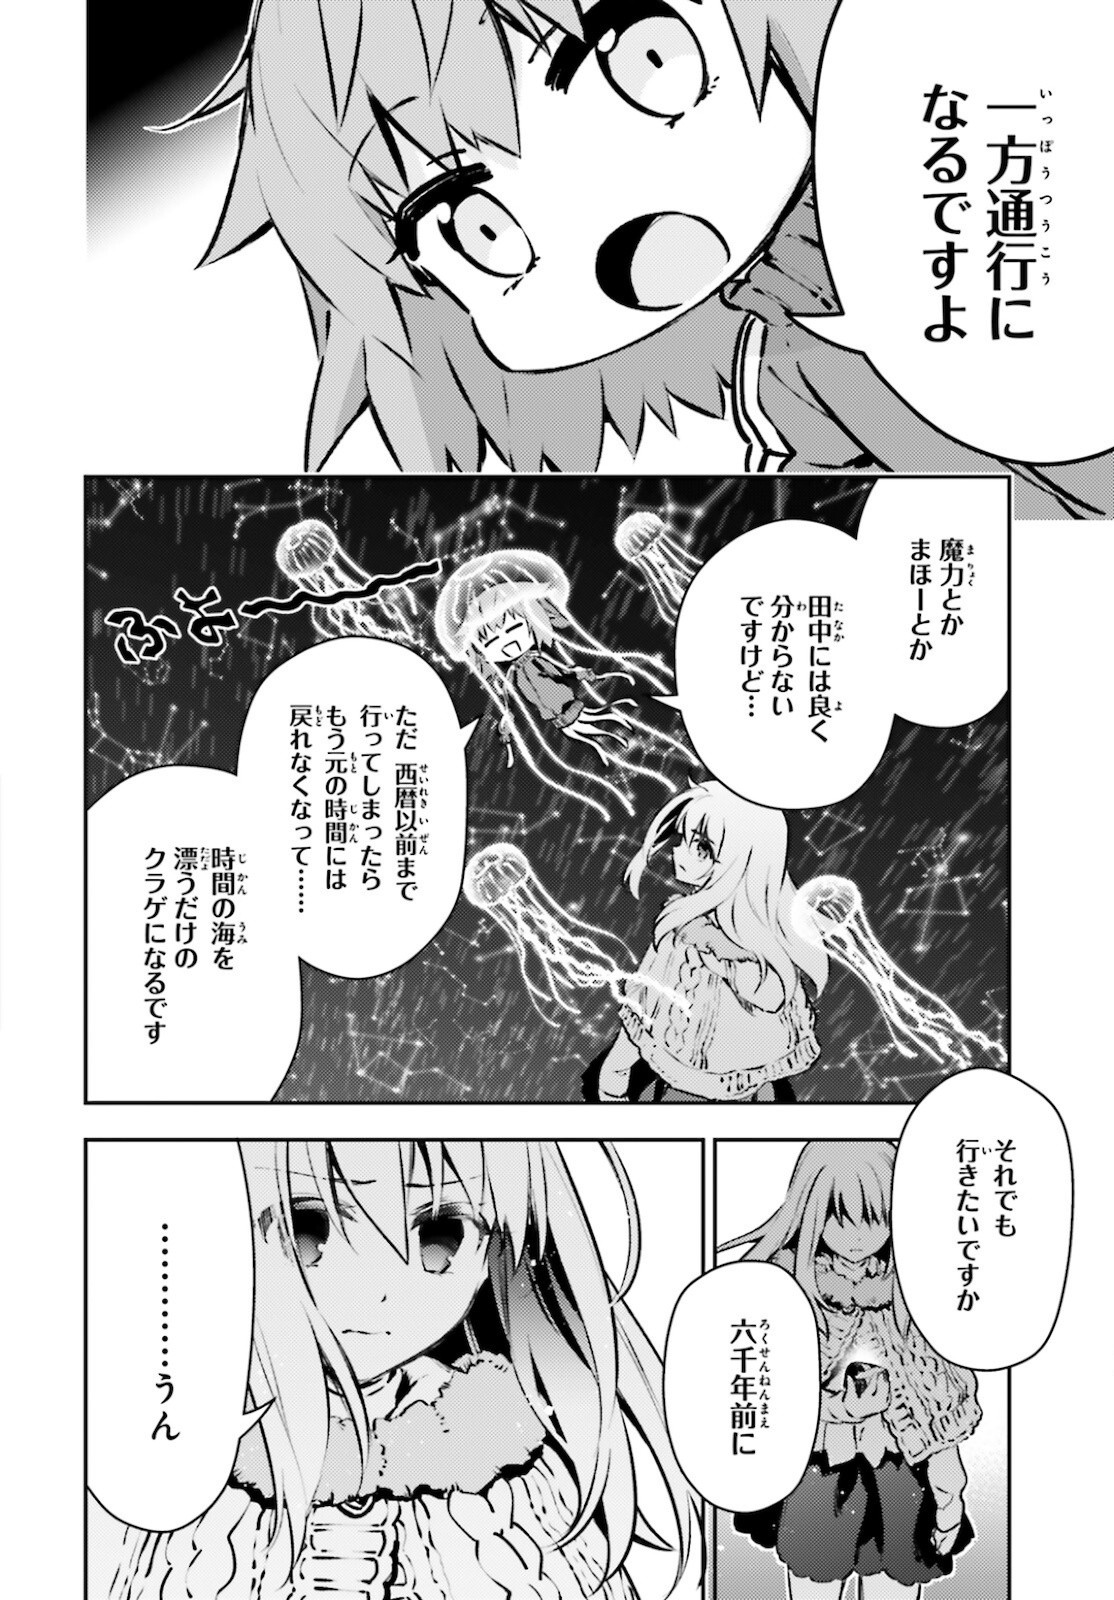 Fate/Kaleid Liner Prisma Illya Drei! - Chapter 66-2 - Page 4